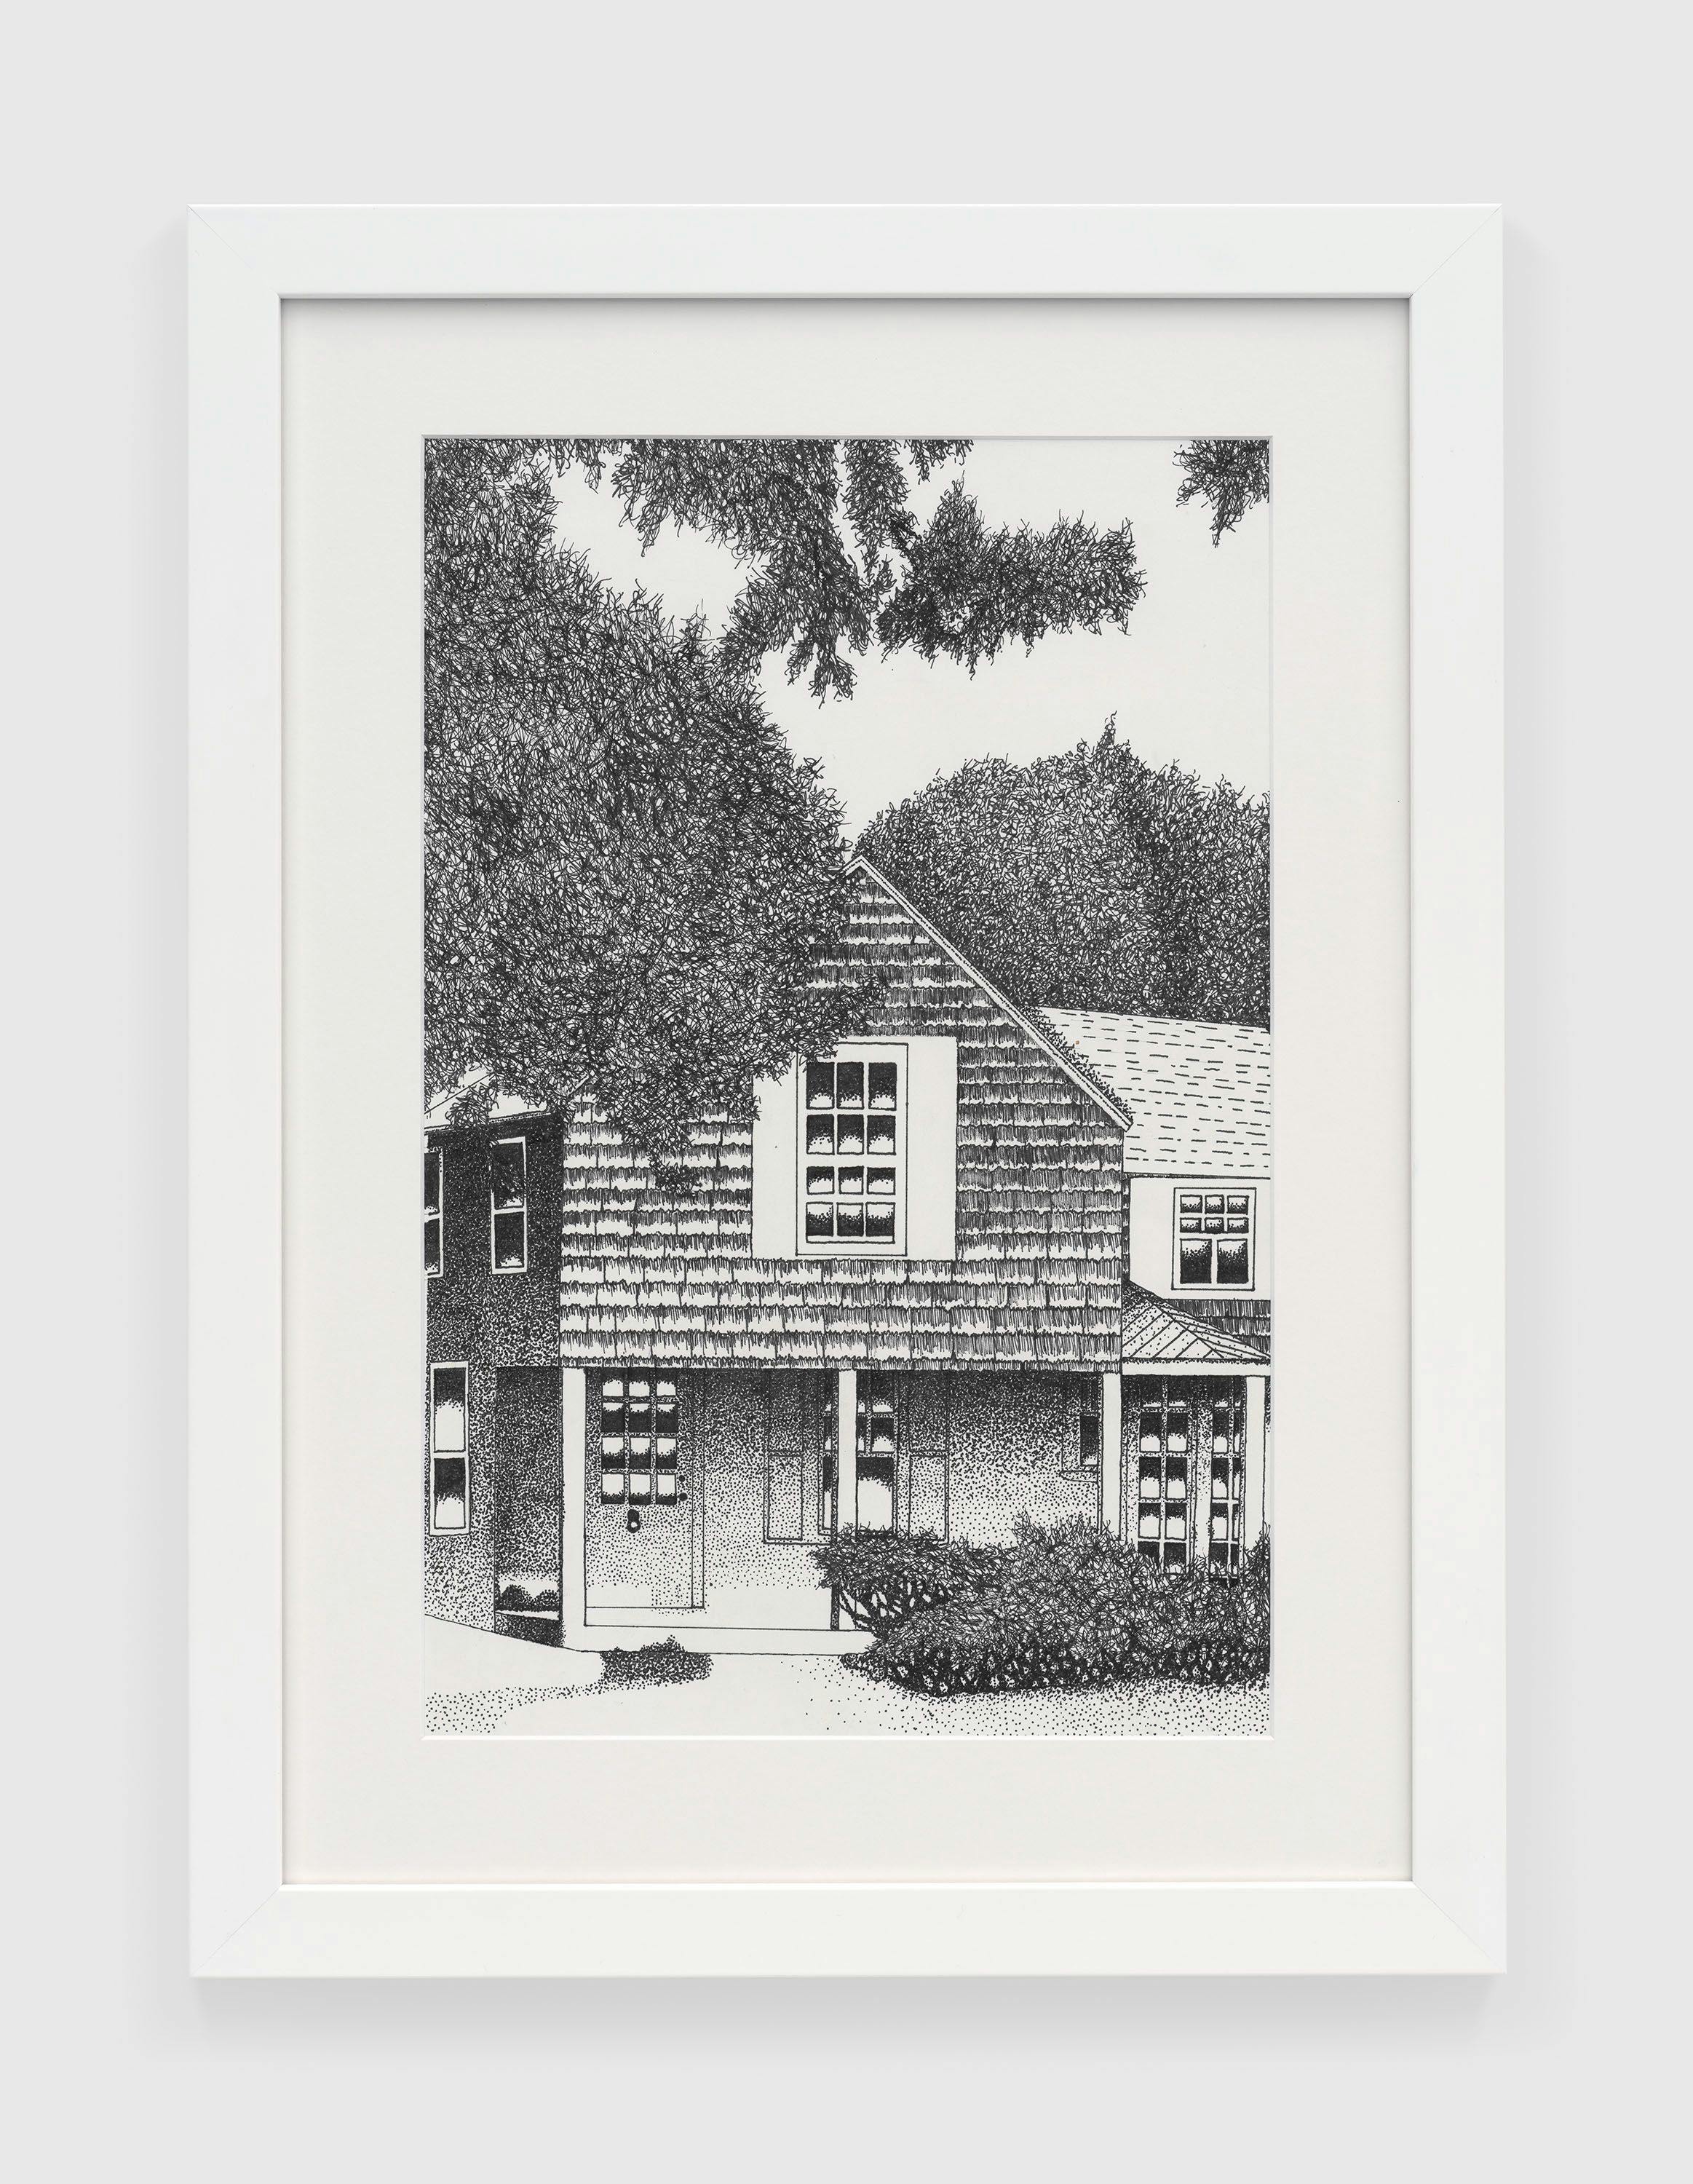 A drawing by Christopher Tolan, titled 147 Montauk Highway, dated 2016.